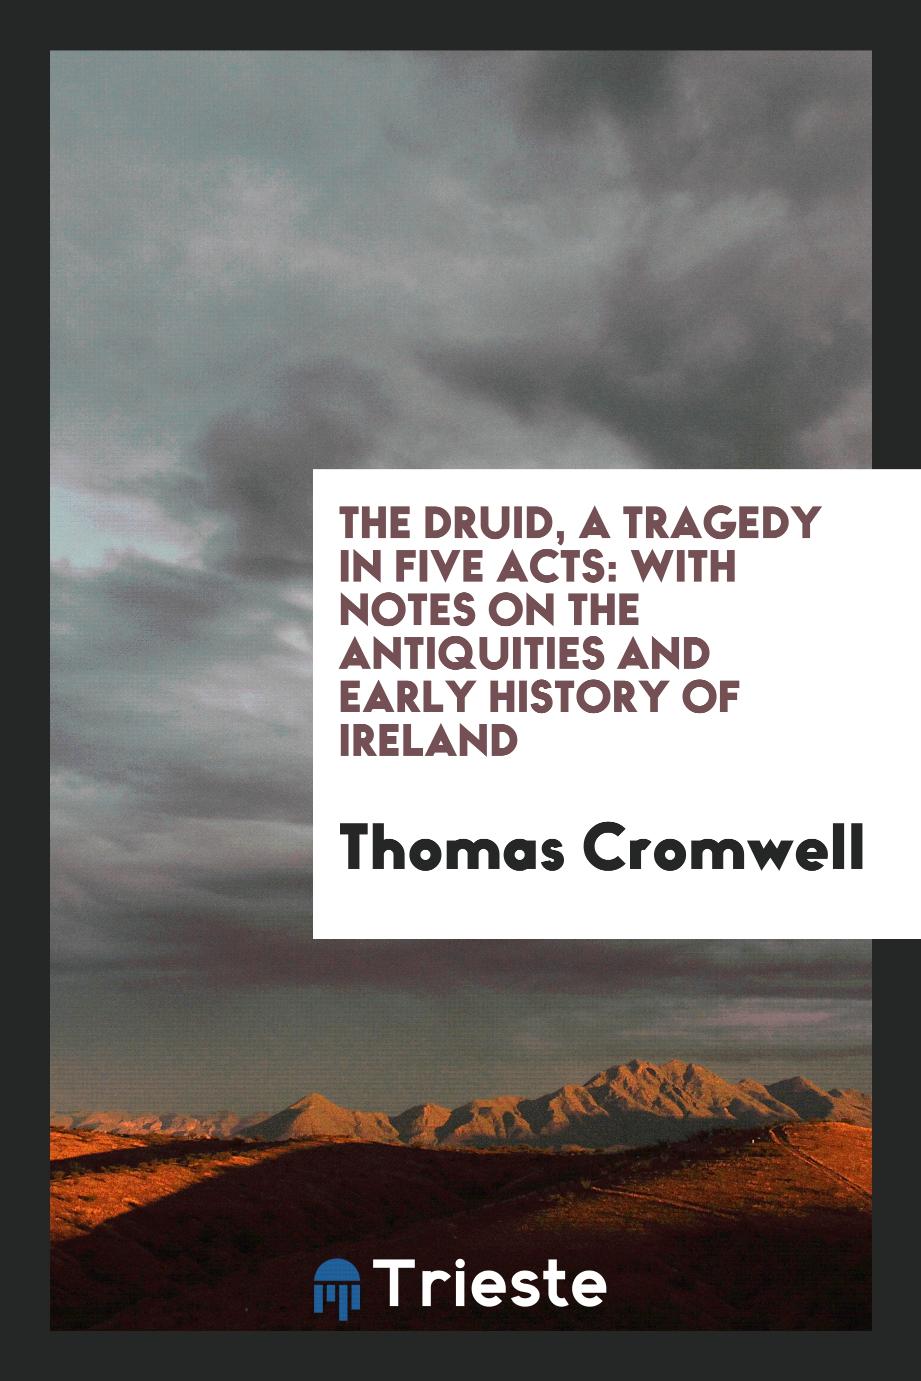 The Druid, a Tragedy in Five Acts: With Notes on the Antiquities and Early History of Ireland